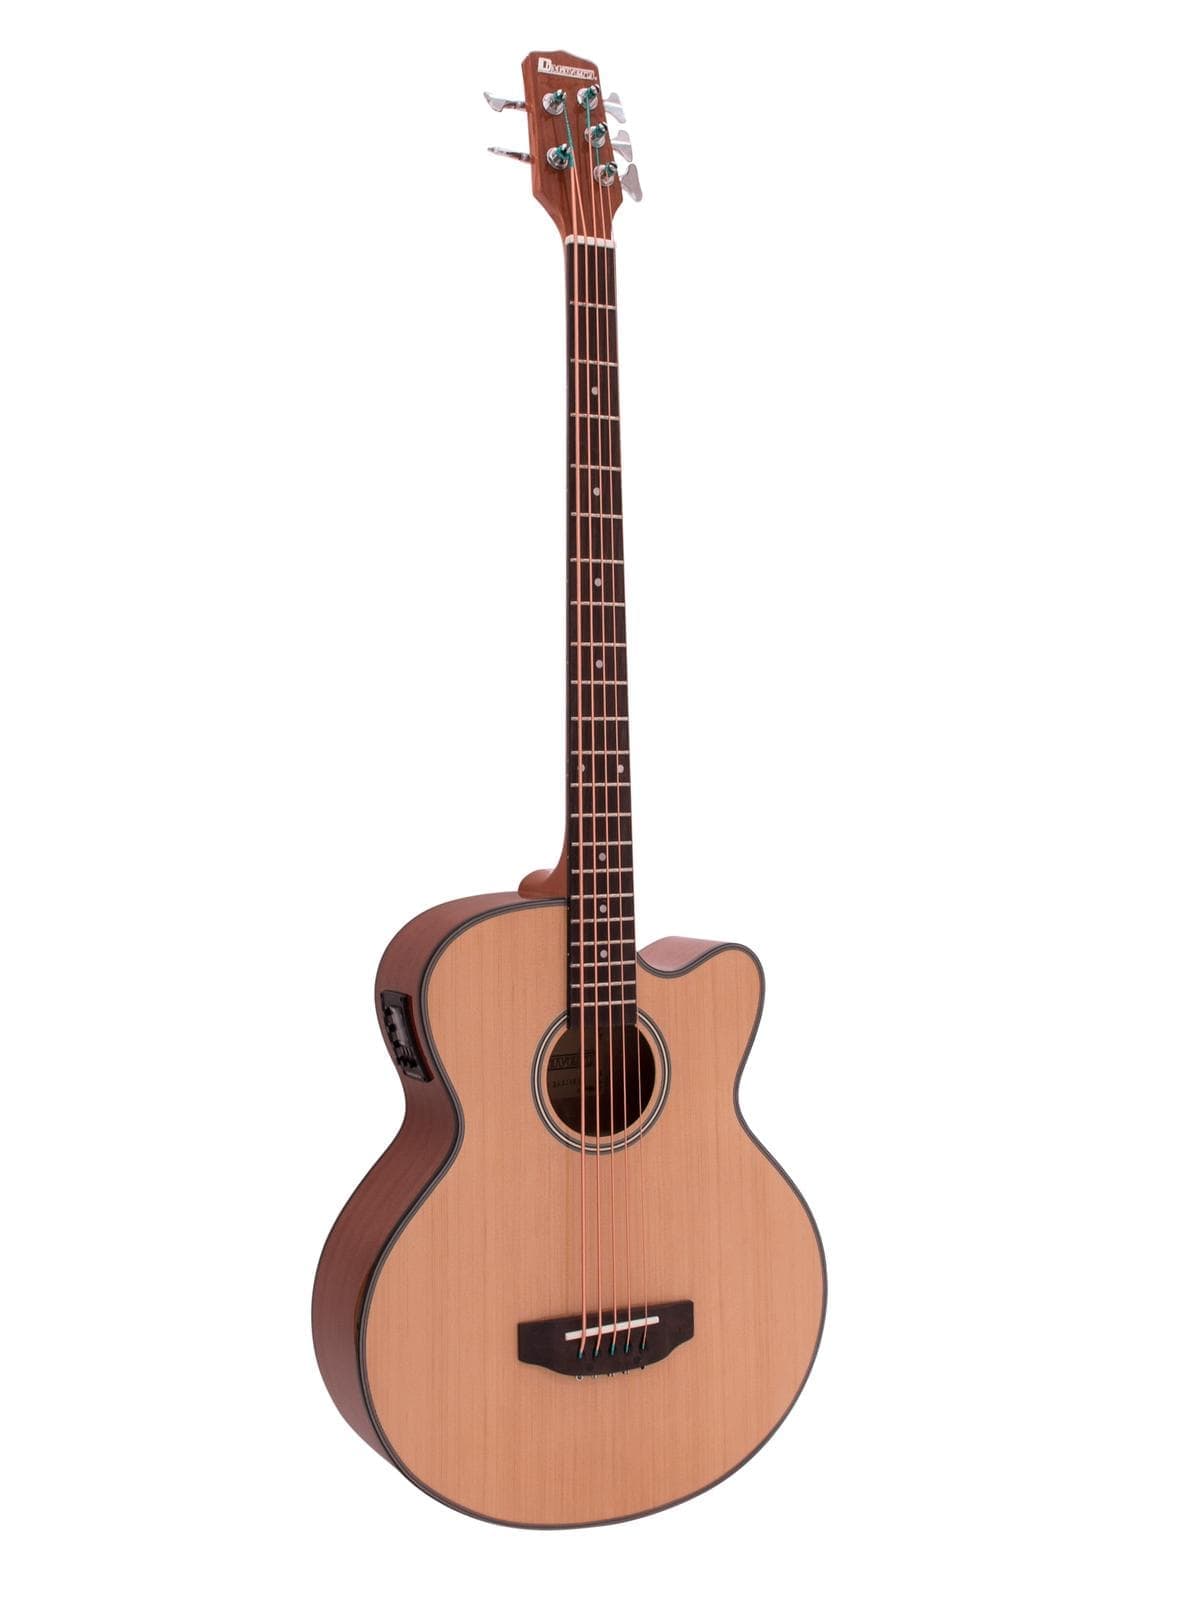 DIMAVERY AB-455 Acoustic Bass, 5-string, nature